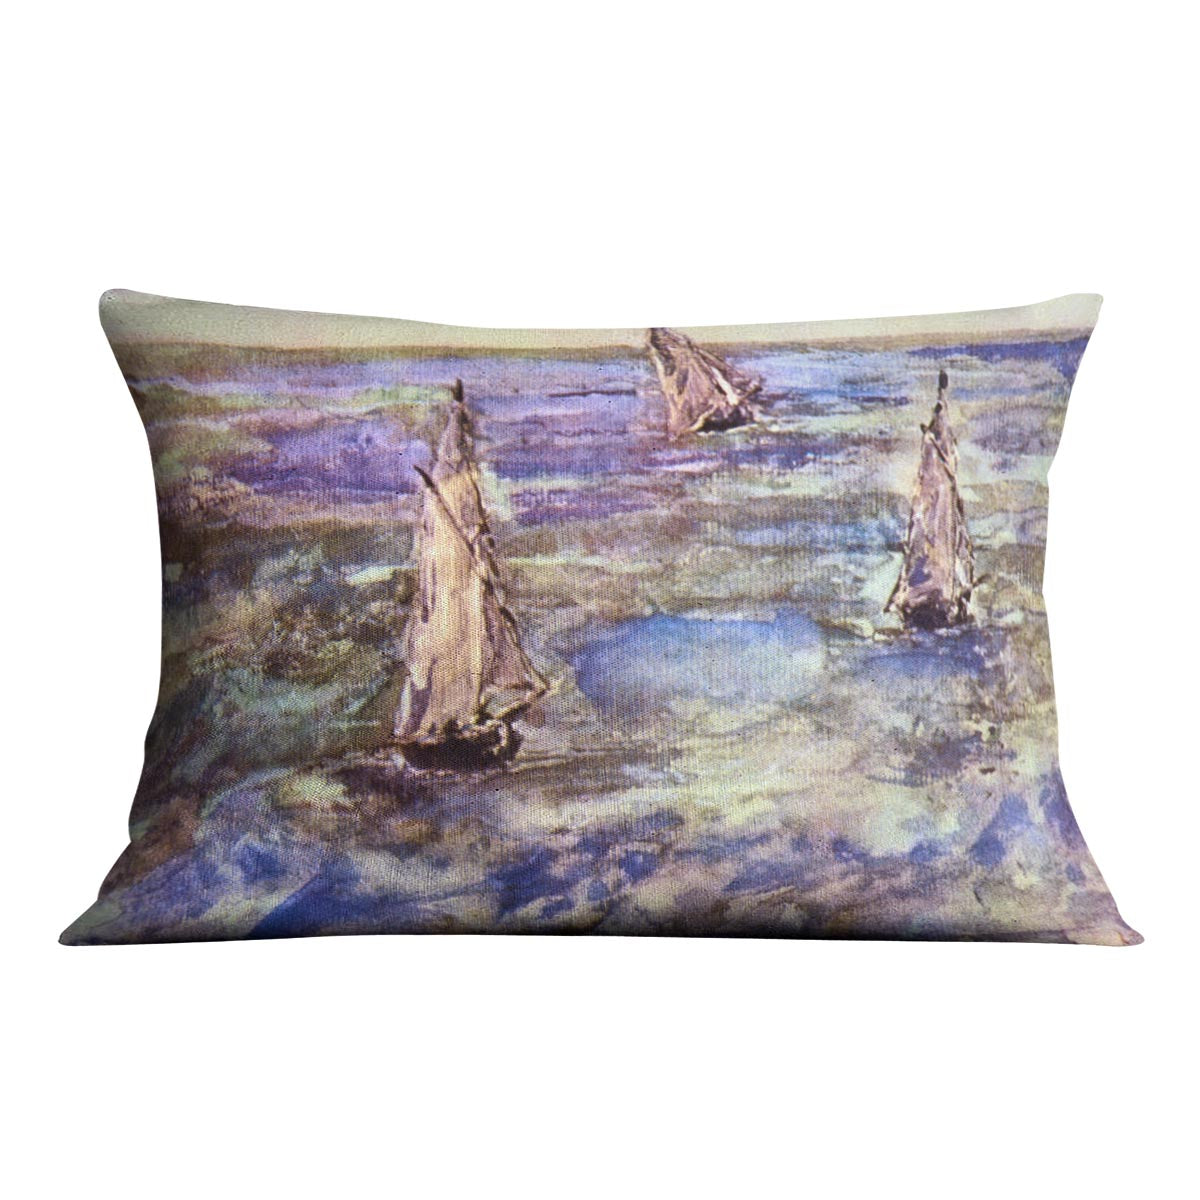 Seascape 1873 by Manet Cushion